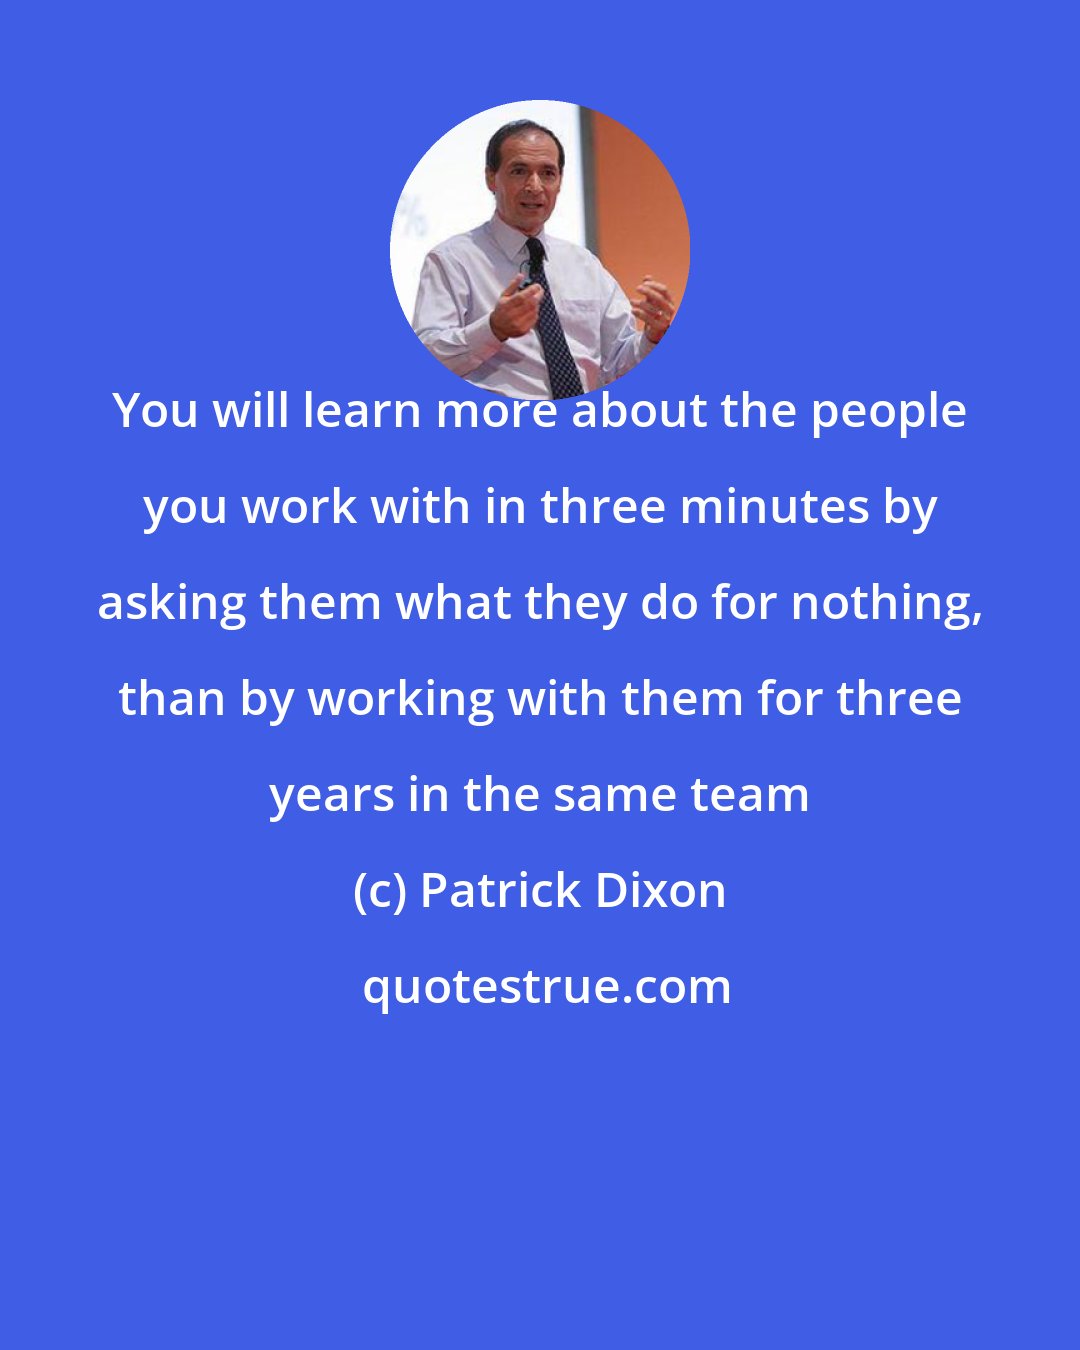 Patrick Dixon: You will learn more about the people you work with in three minutes by asking them what they do for nothing, than by working with them for three years in the same team